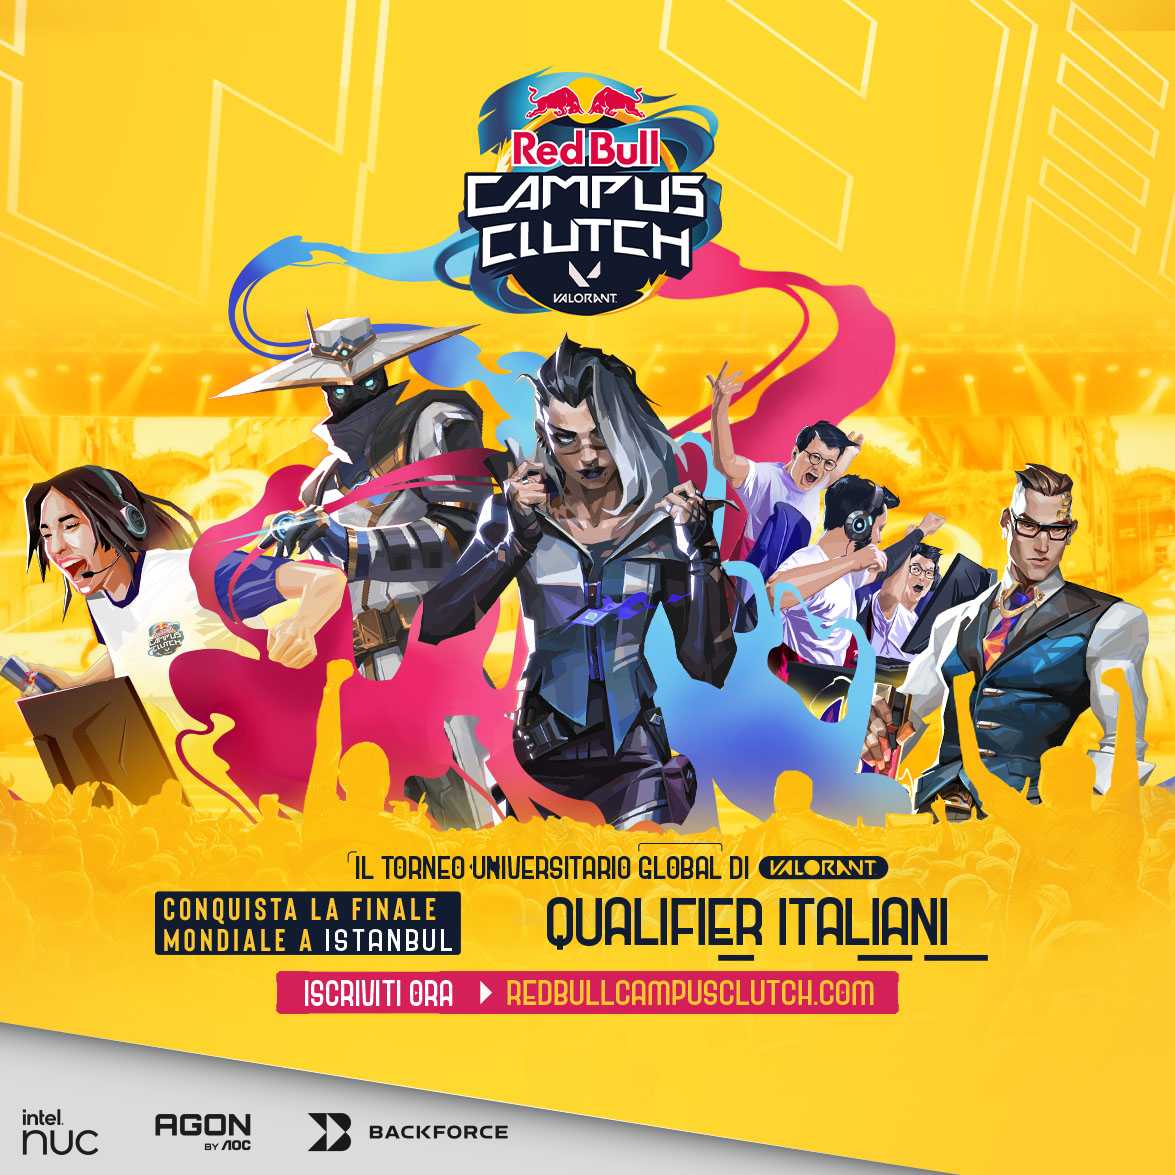 Red Bull Campus Clutch: here is the 2023 edition